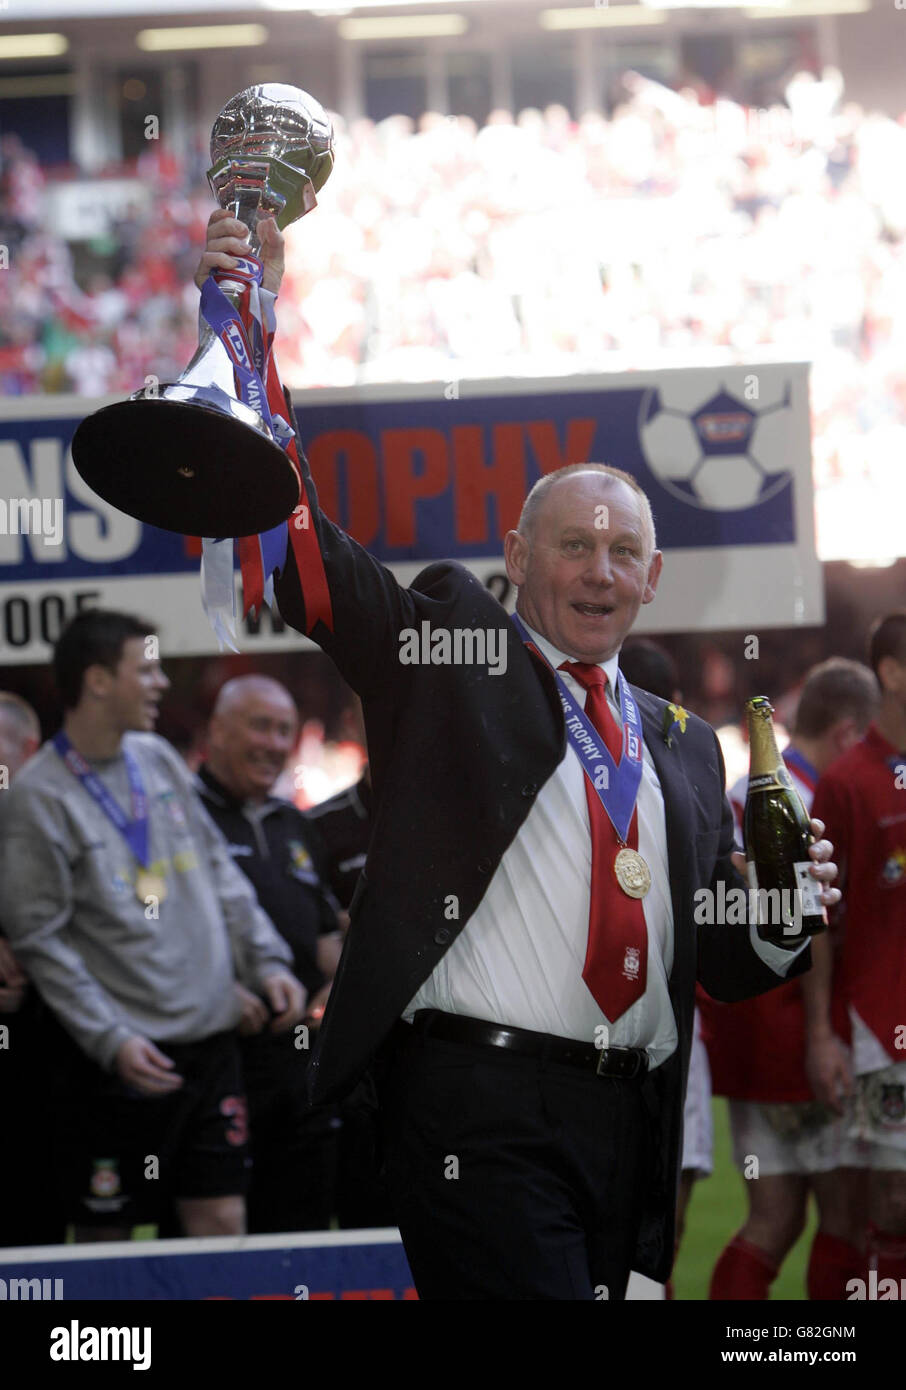 Soccer - LDV Vans Trophy - Final - Southend United v Wrexham - Millennium Stadium. Wrexham manager Denis Smith celebrates with the trophy after their 2-0 victory over Southend. Stock Photo